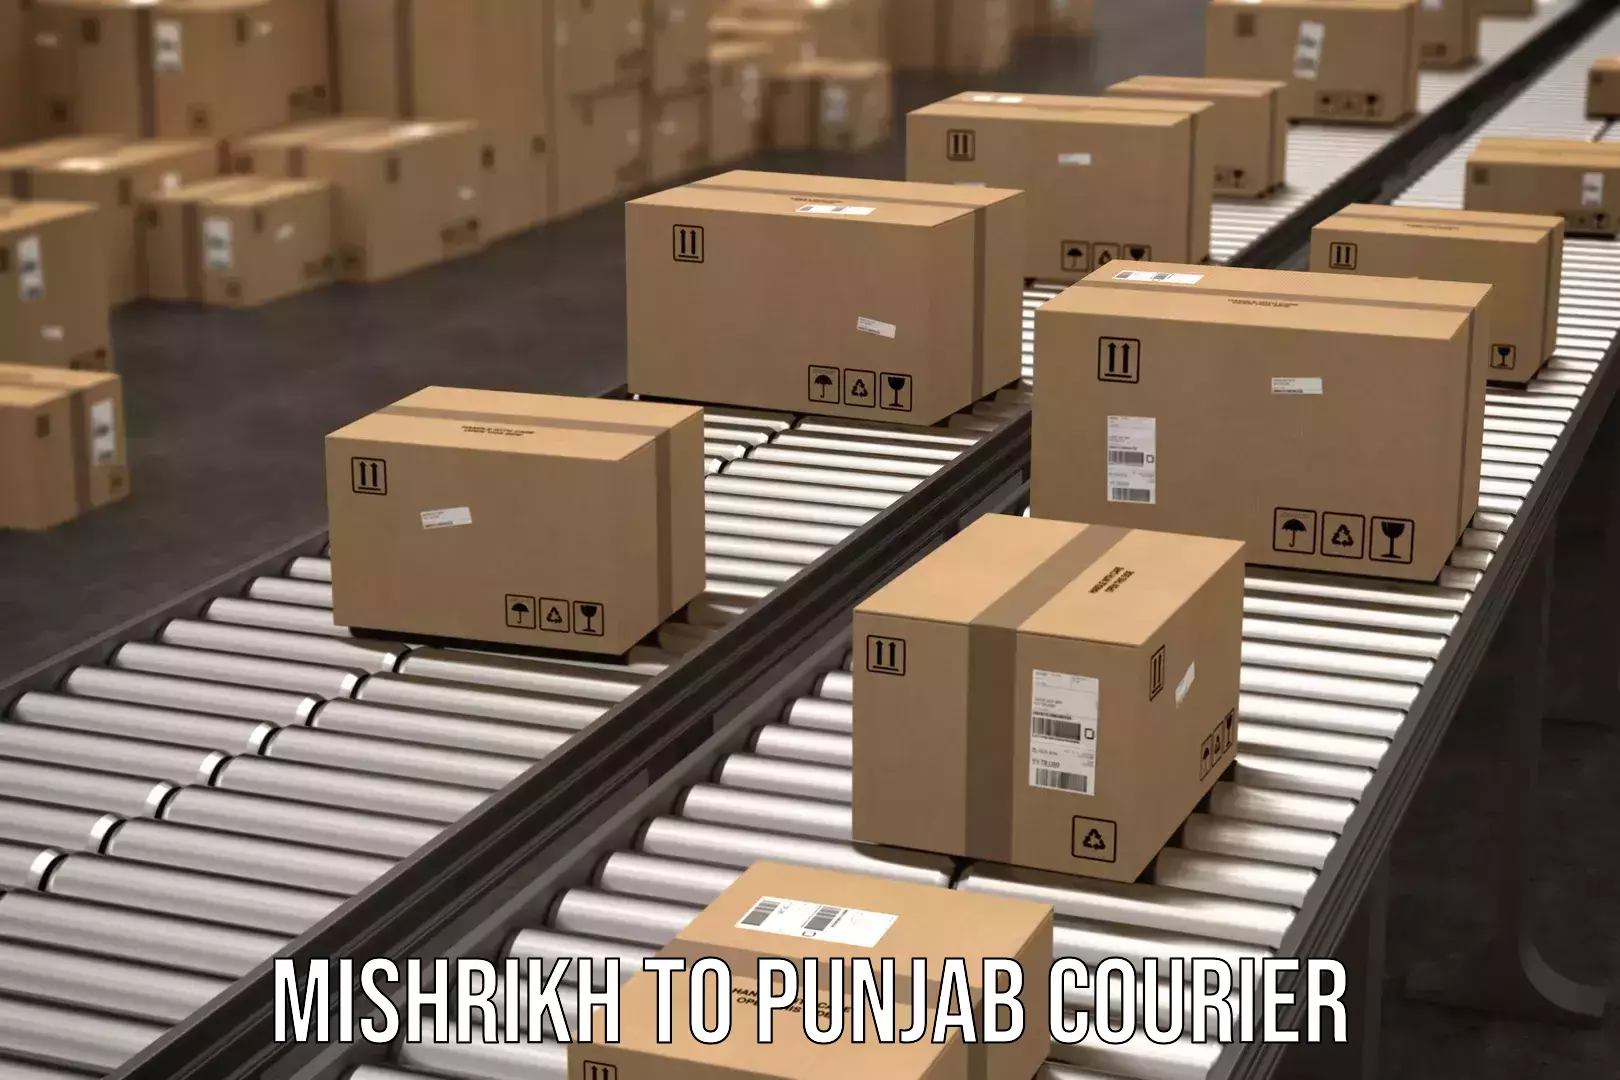 24-hour delivery options Mishrikh to Punjab